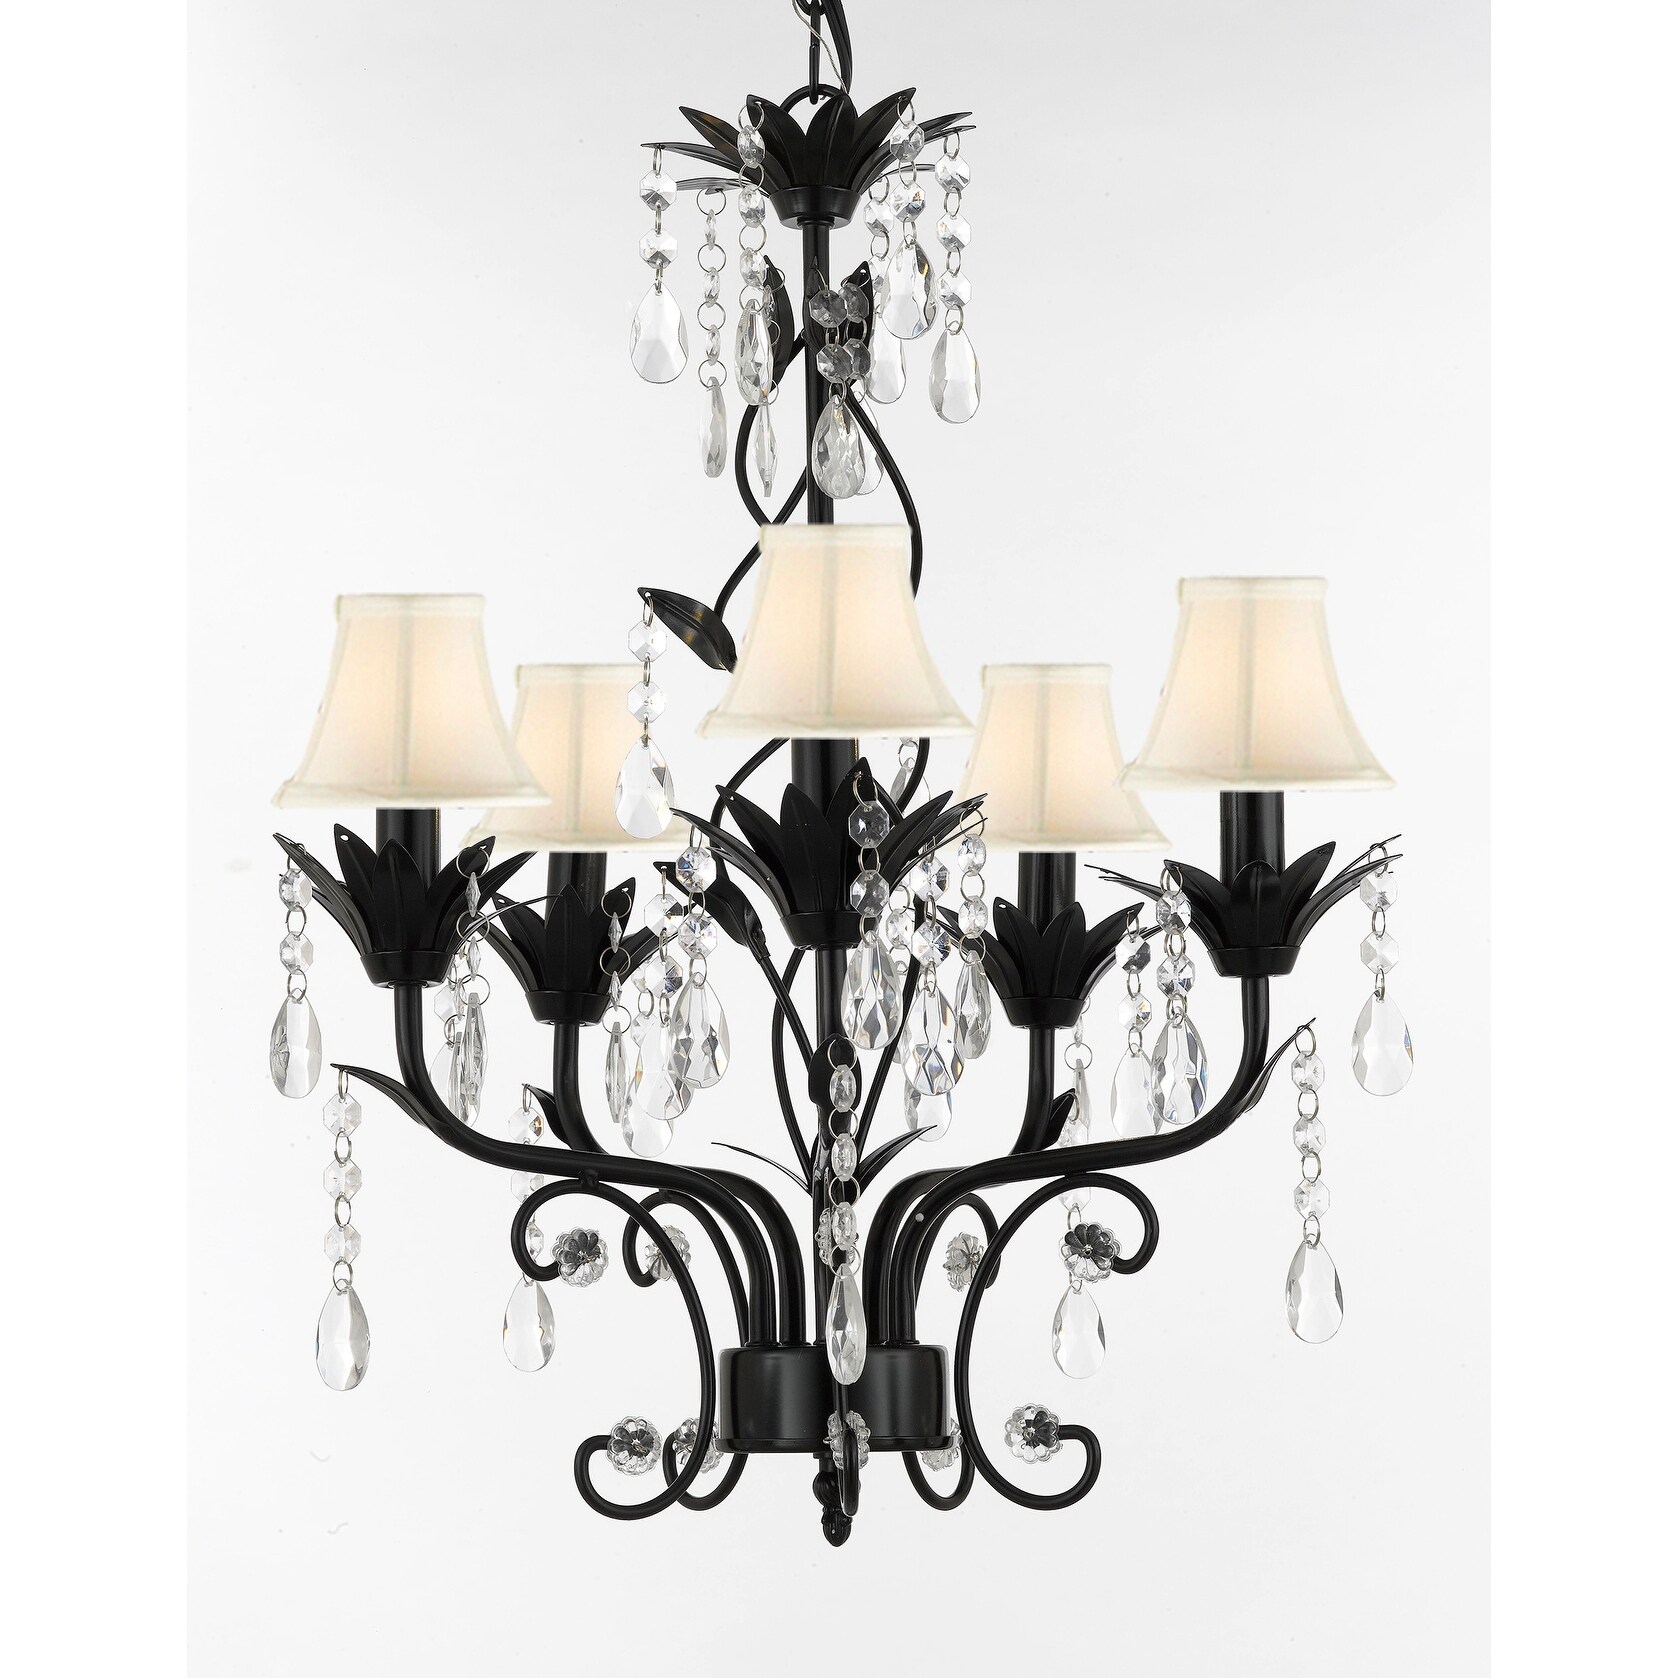 Lamps Lighting Ceiling Fans Wrought Iron Crystal Black